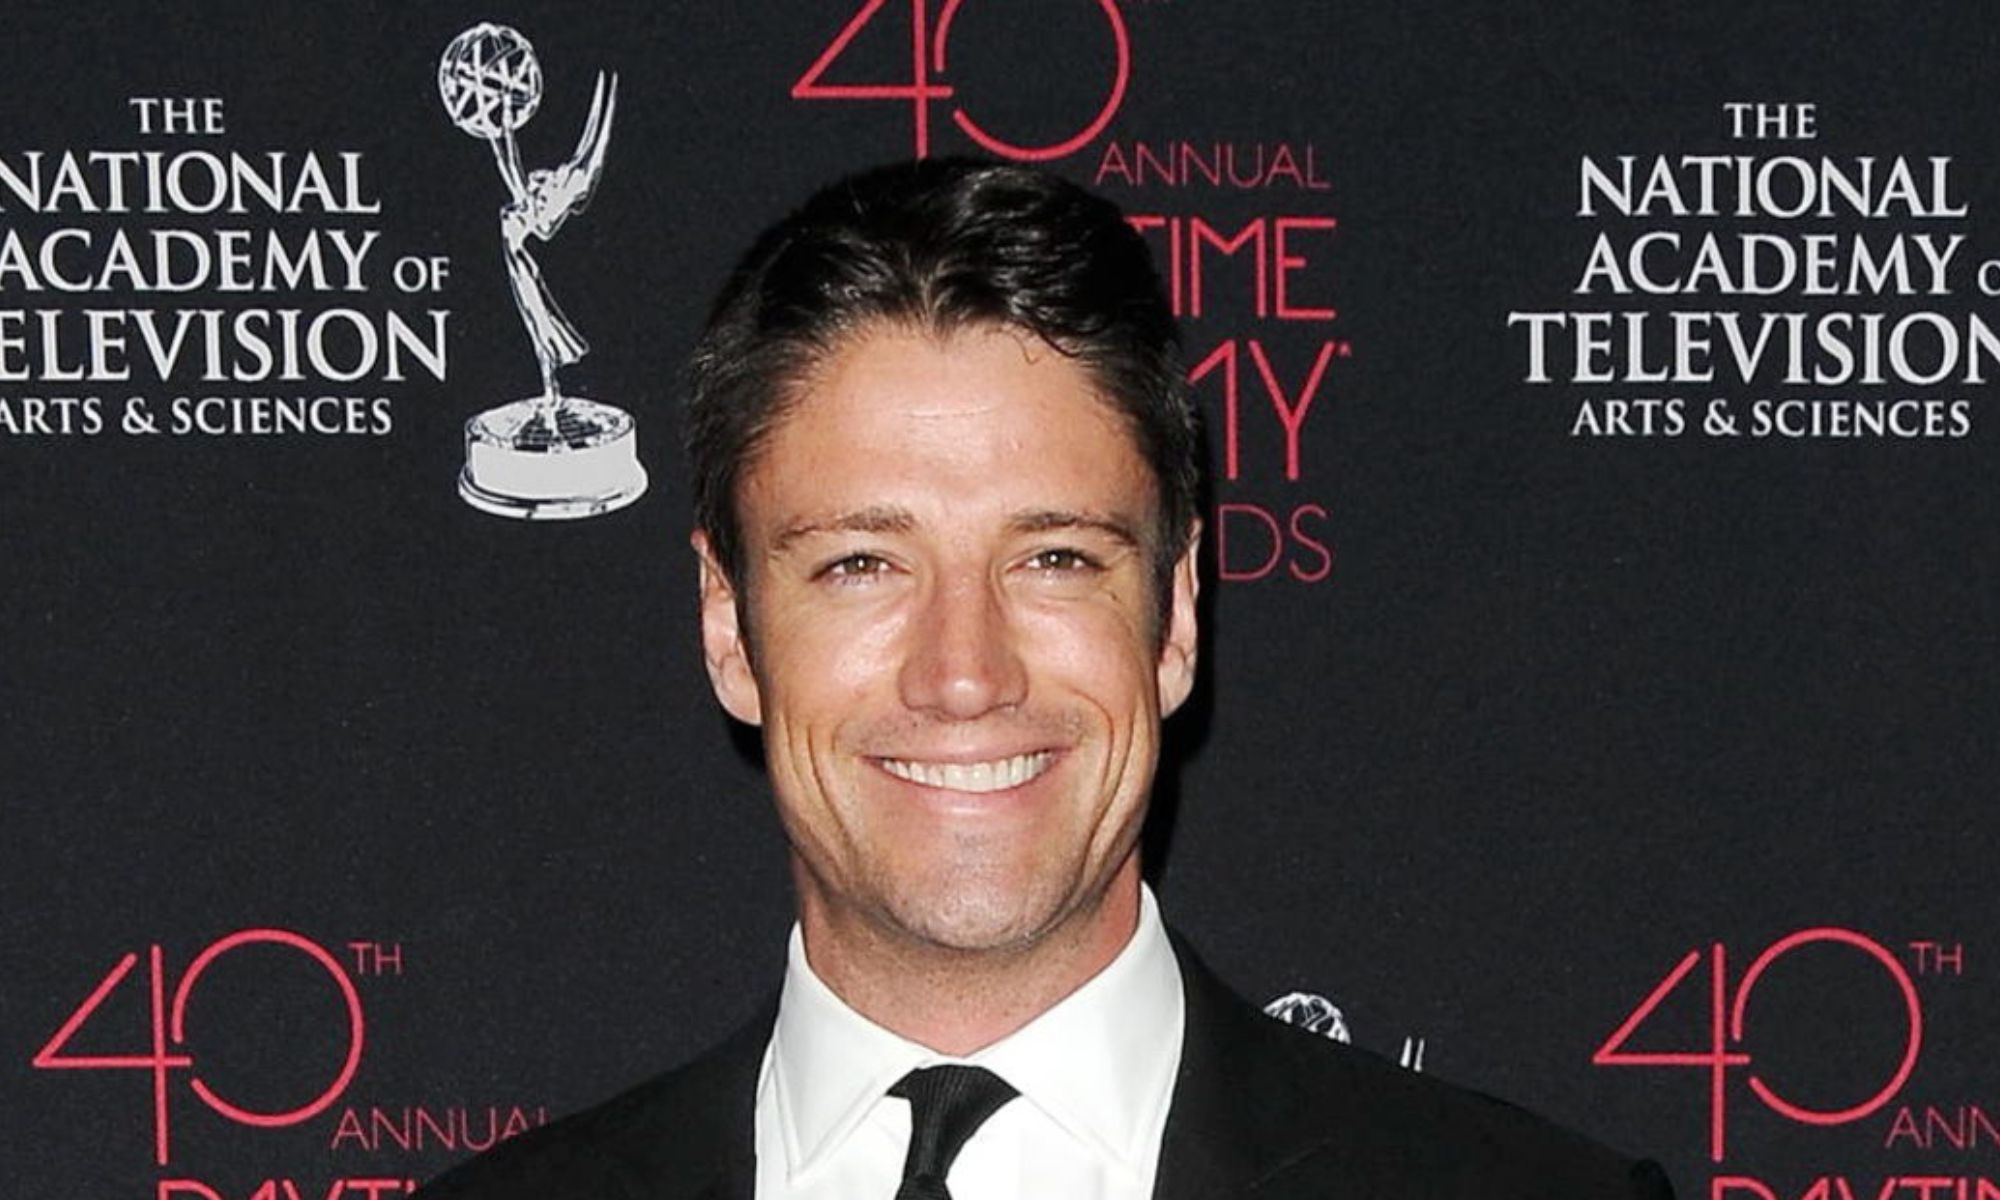 james scott played ej dimera on days of our lives.